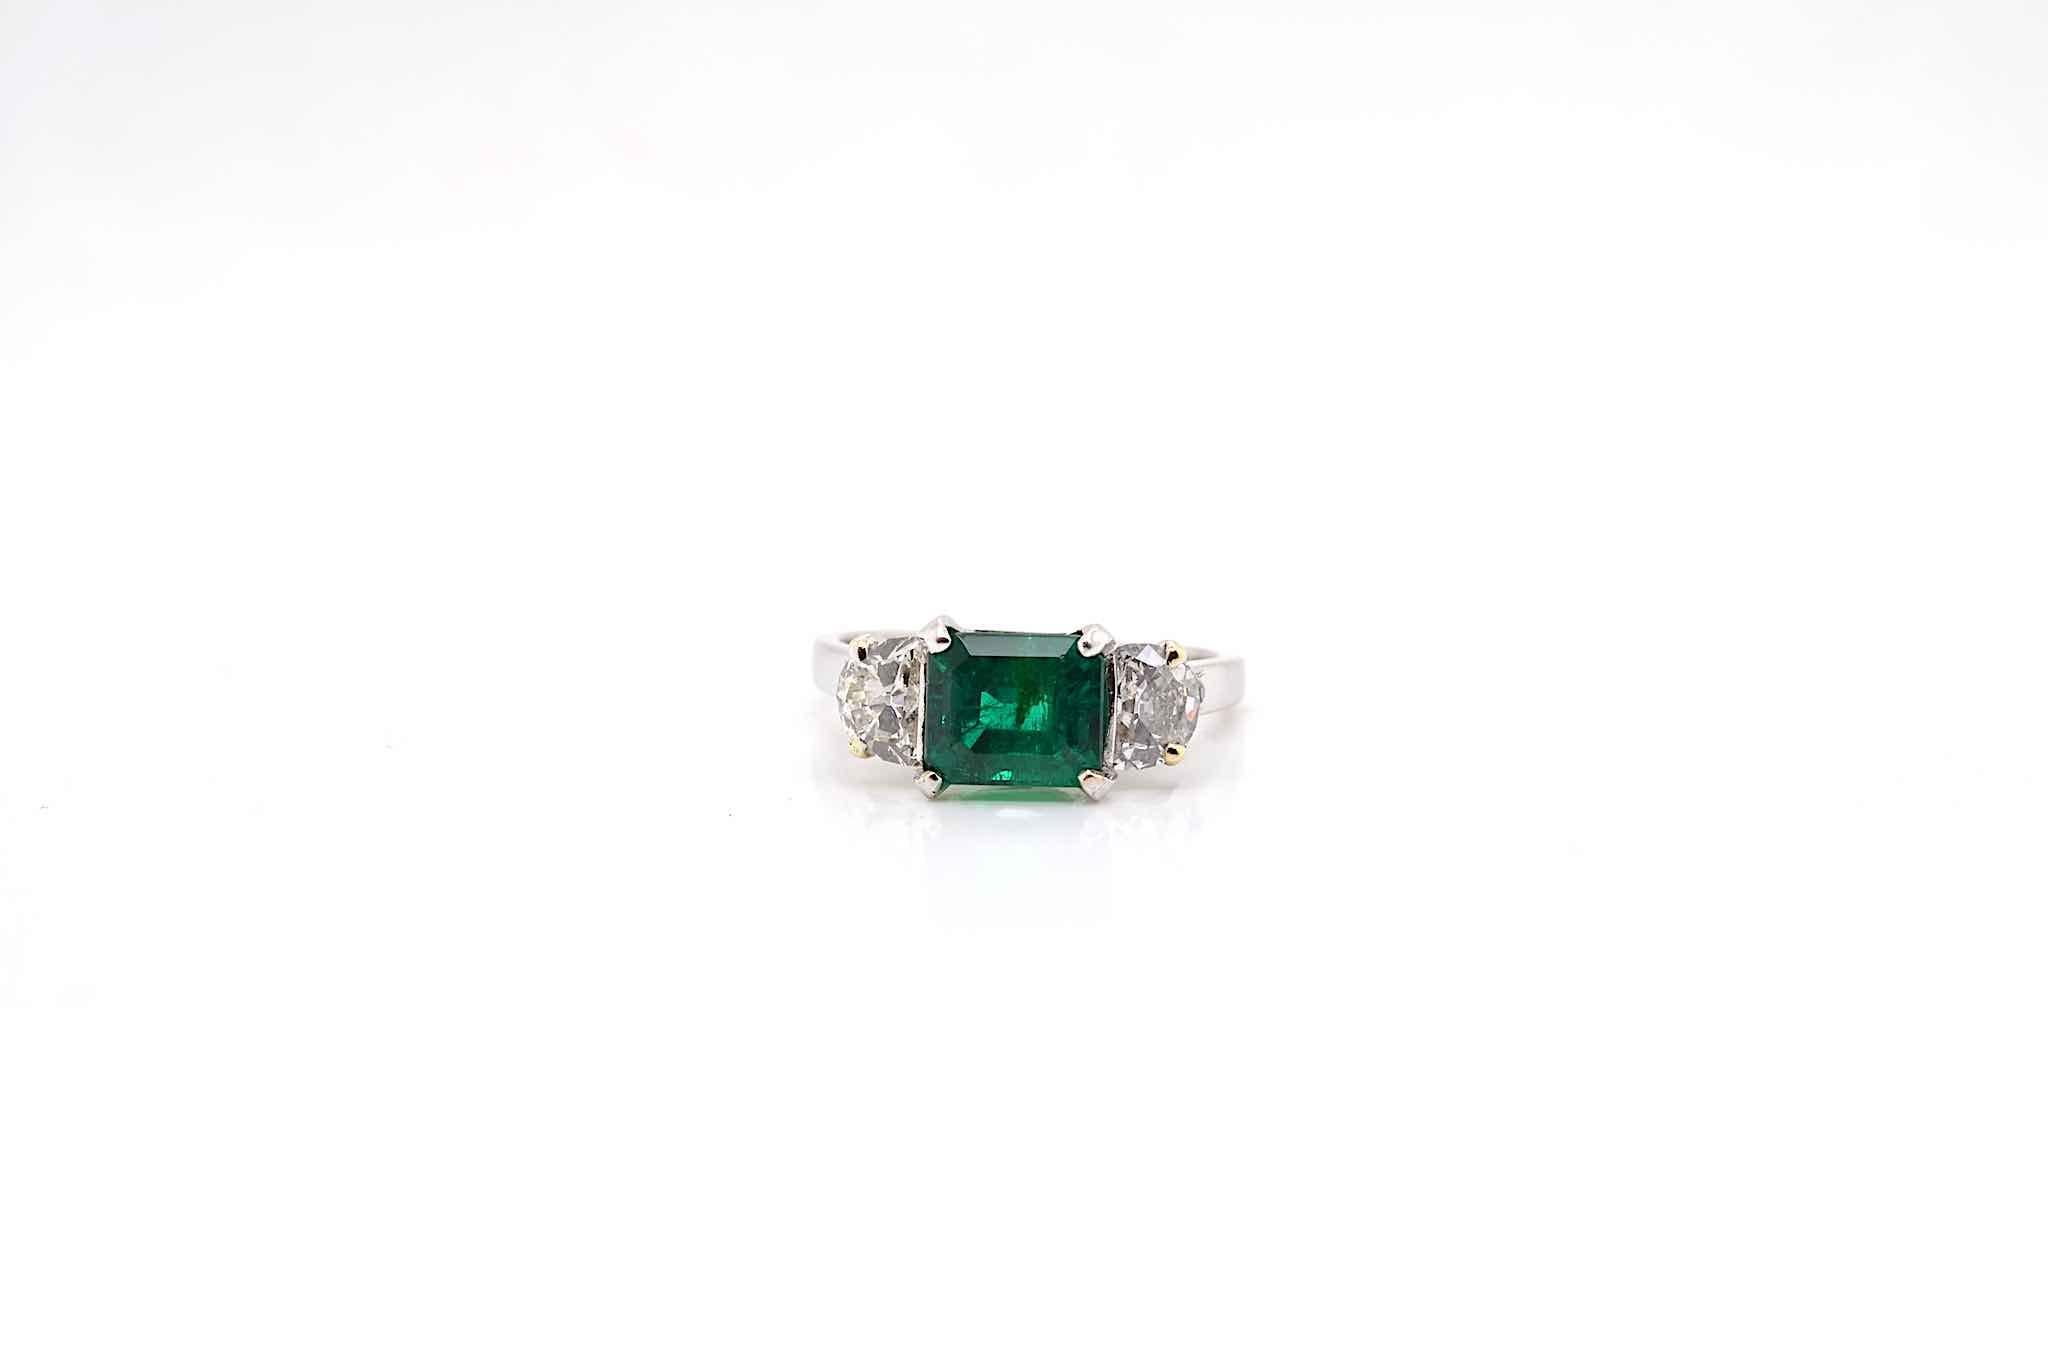 Stones: 2 carats emerald and diamonds
half-moons for a total weight of 0.85 carats.
Material: Platinum
Dimensions:
Weight: 5.8g
Size: 54.5 (free sizing)
Certificate
Ref. :24771